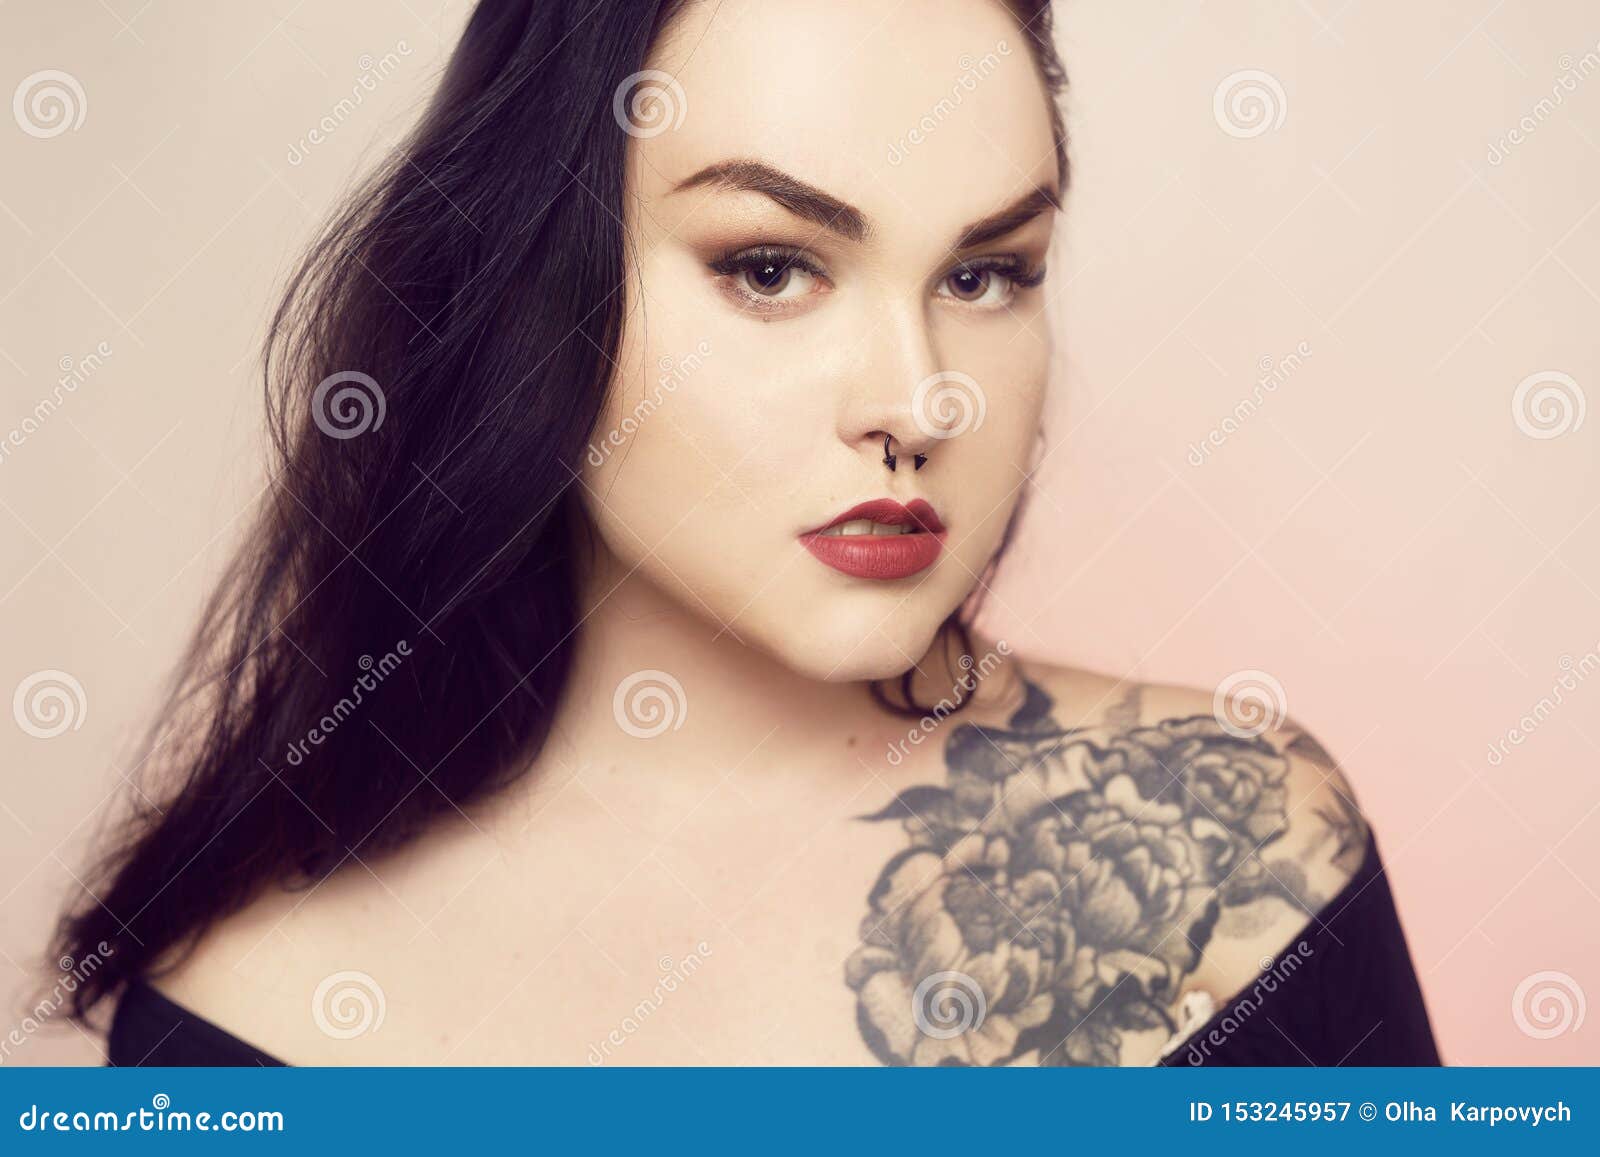 Portrait of a Brunette with a Pierced Nose. Beautiful Duvushka with a ...